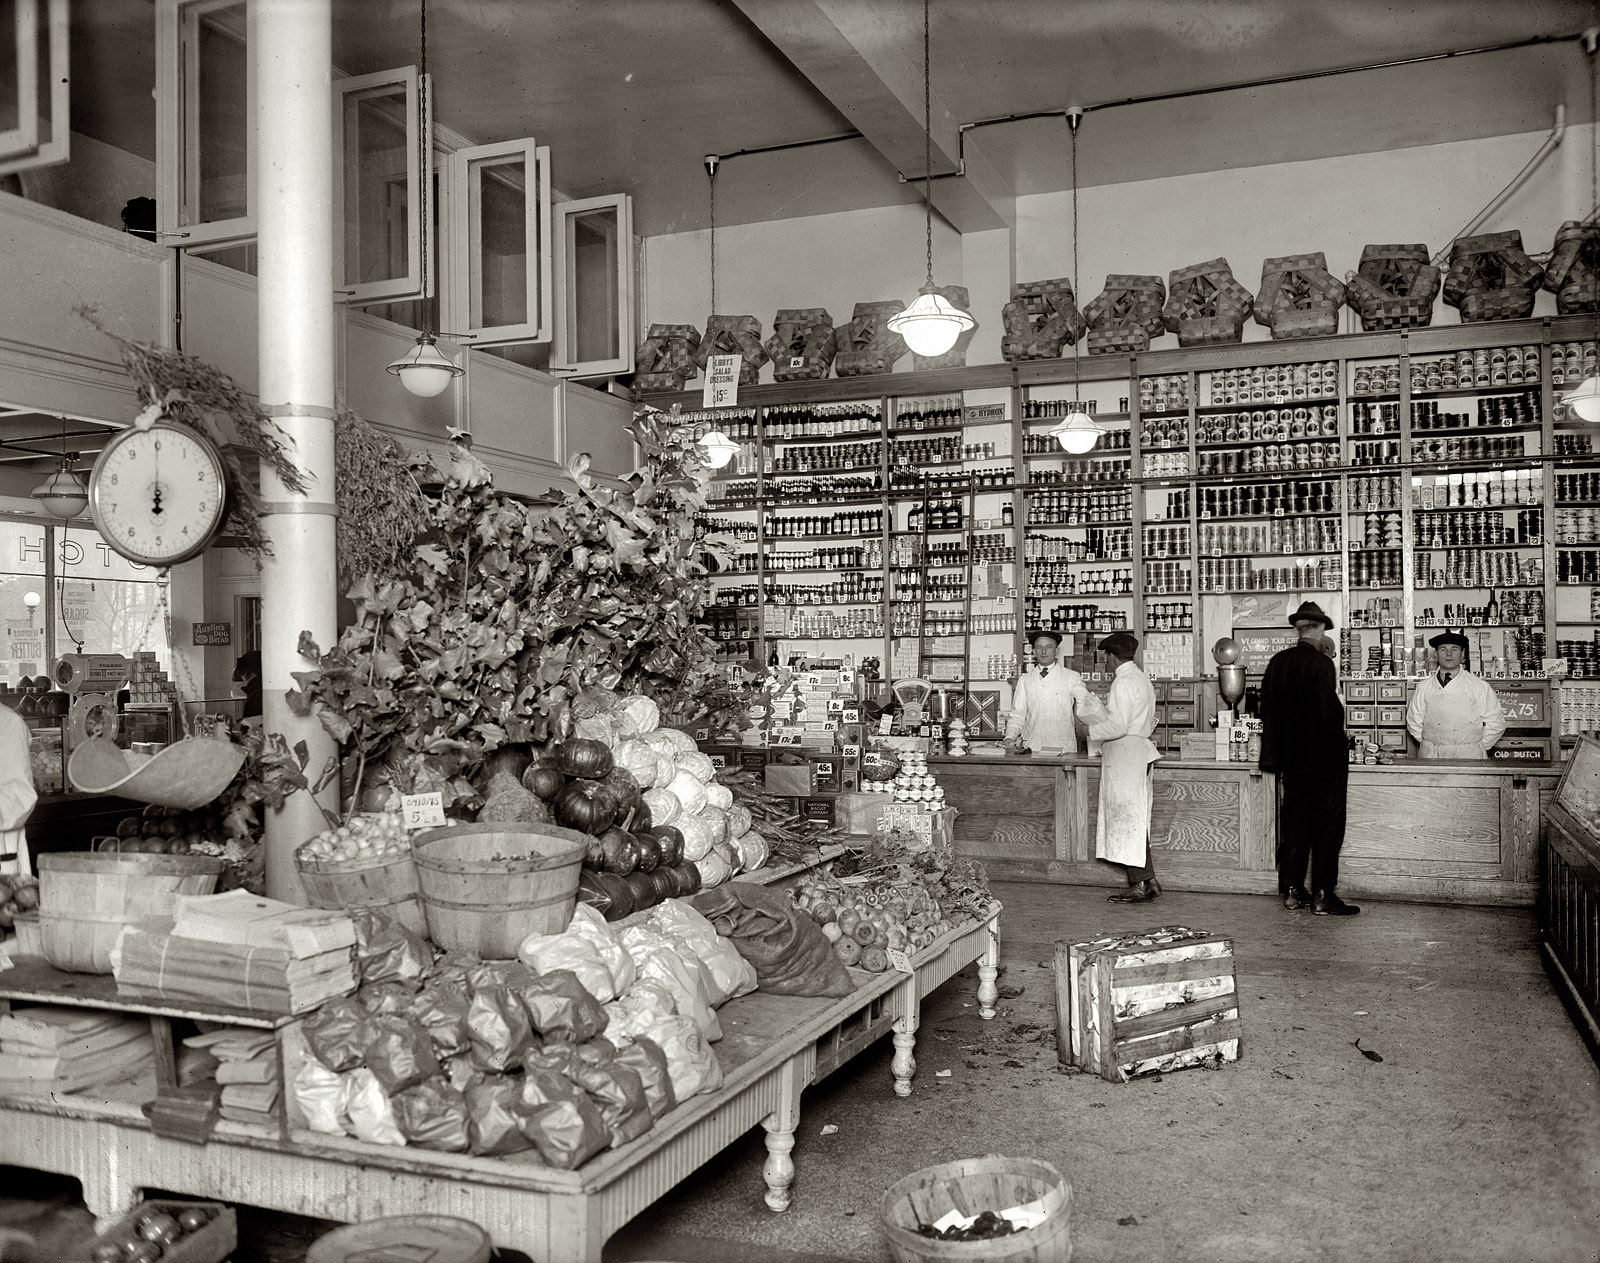 Old Dutch Market circa 1920. The chain ("The Market of Cleanliness"), whose main store was at 622-24 Pennsylvania Avenue, had about a dozen branches in the Washington area. View full size. National Photo Company glass negative.